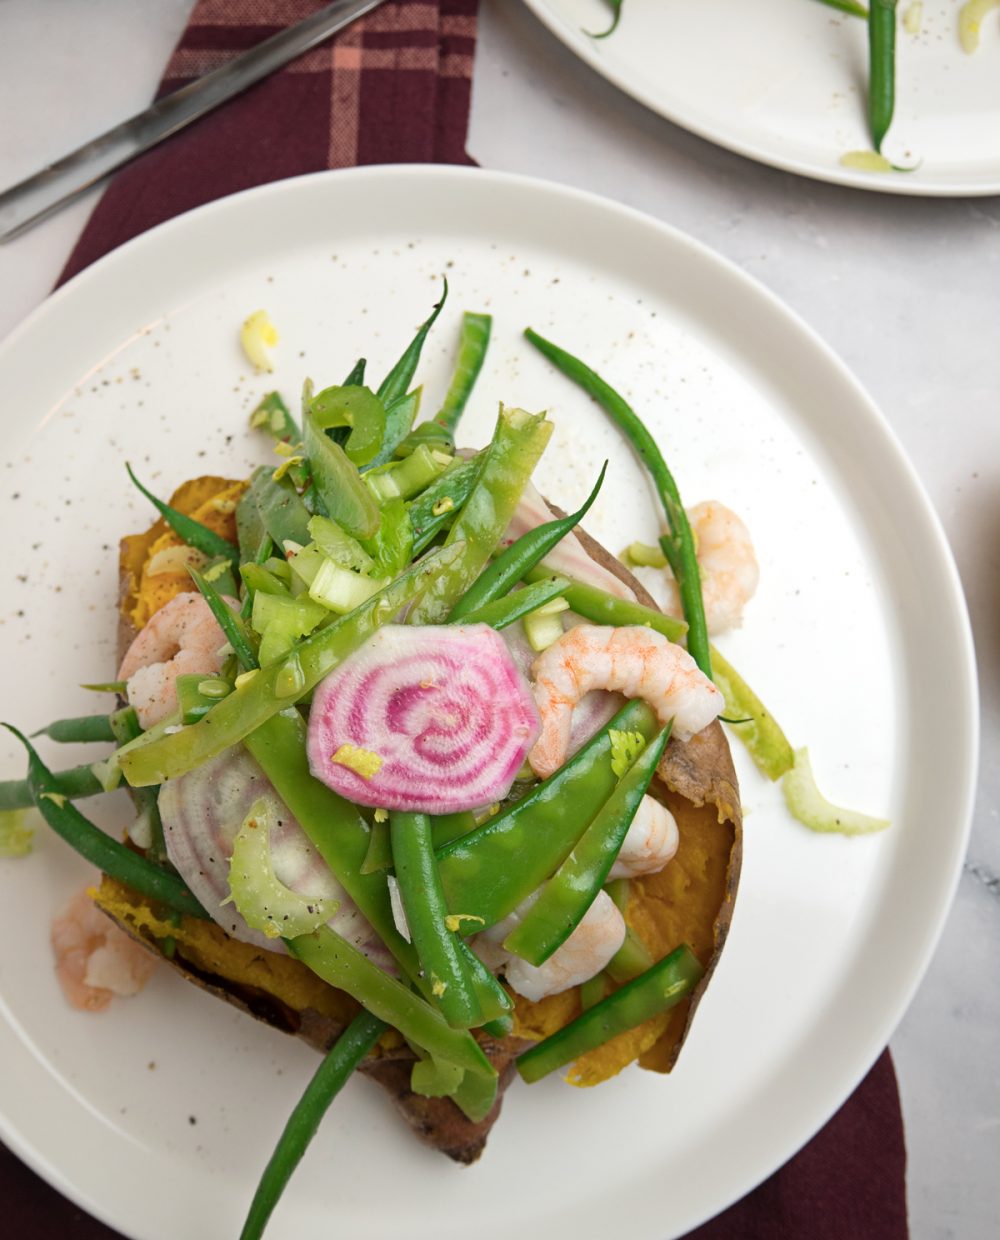 Healthy green bean salad with shrimps on roasted sweet potato